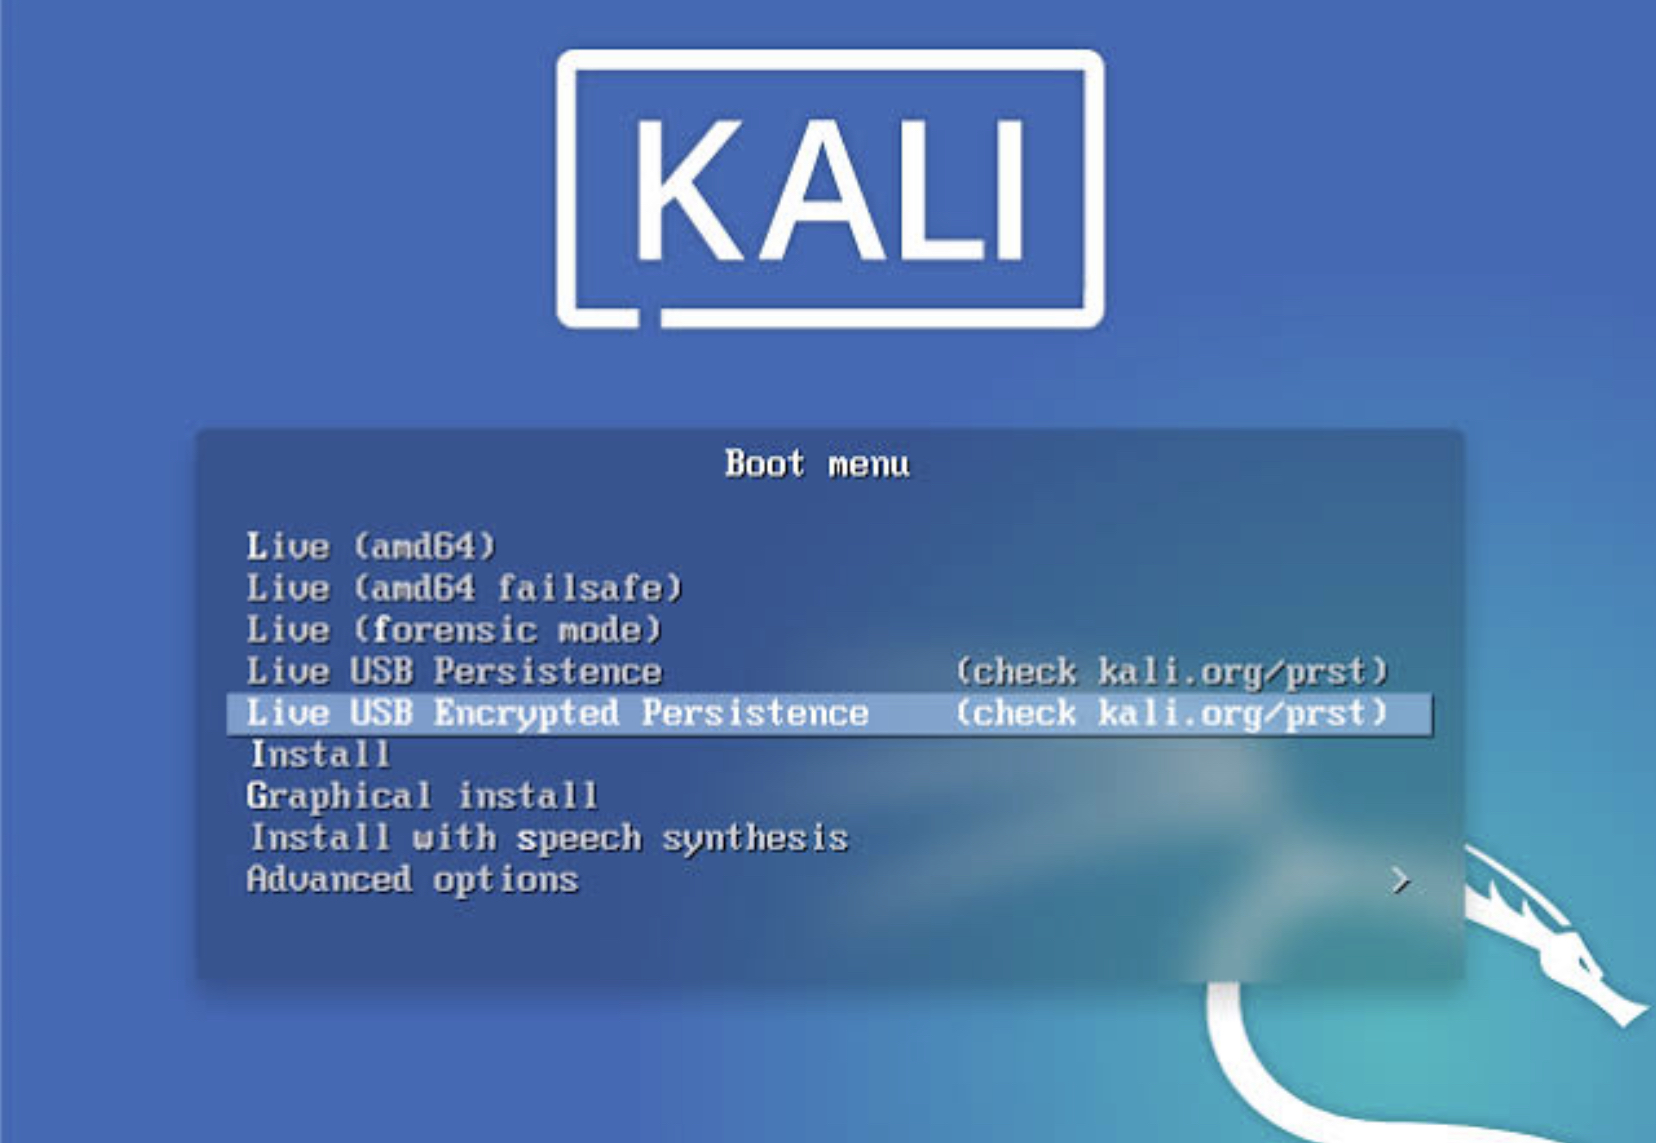 kali linux bootable usb with persistence